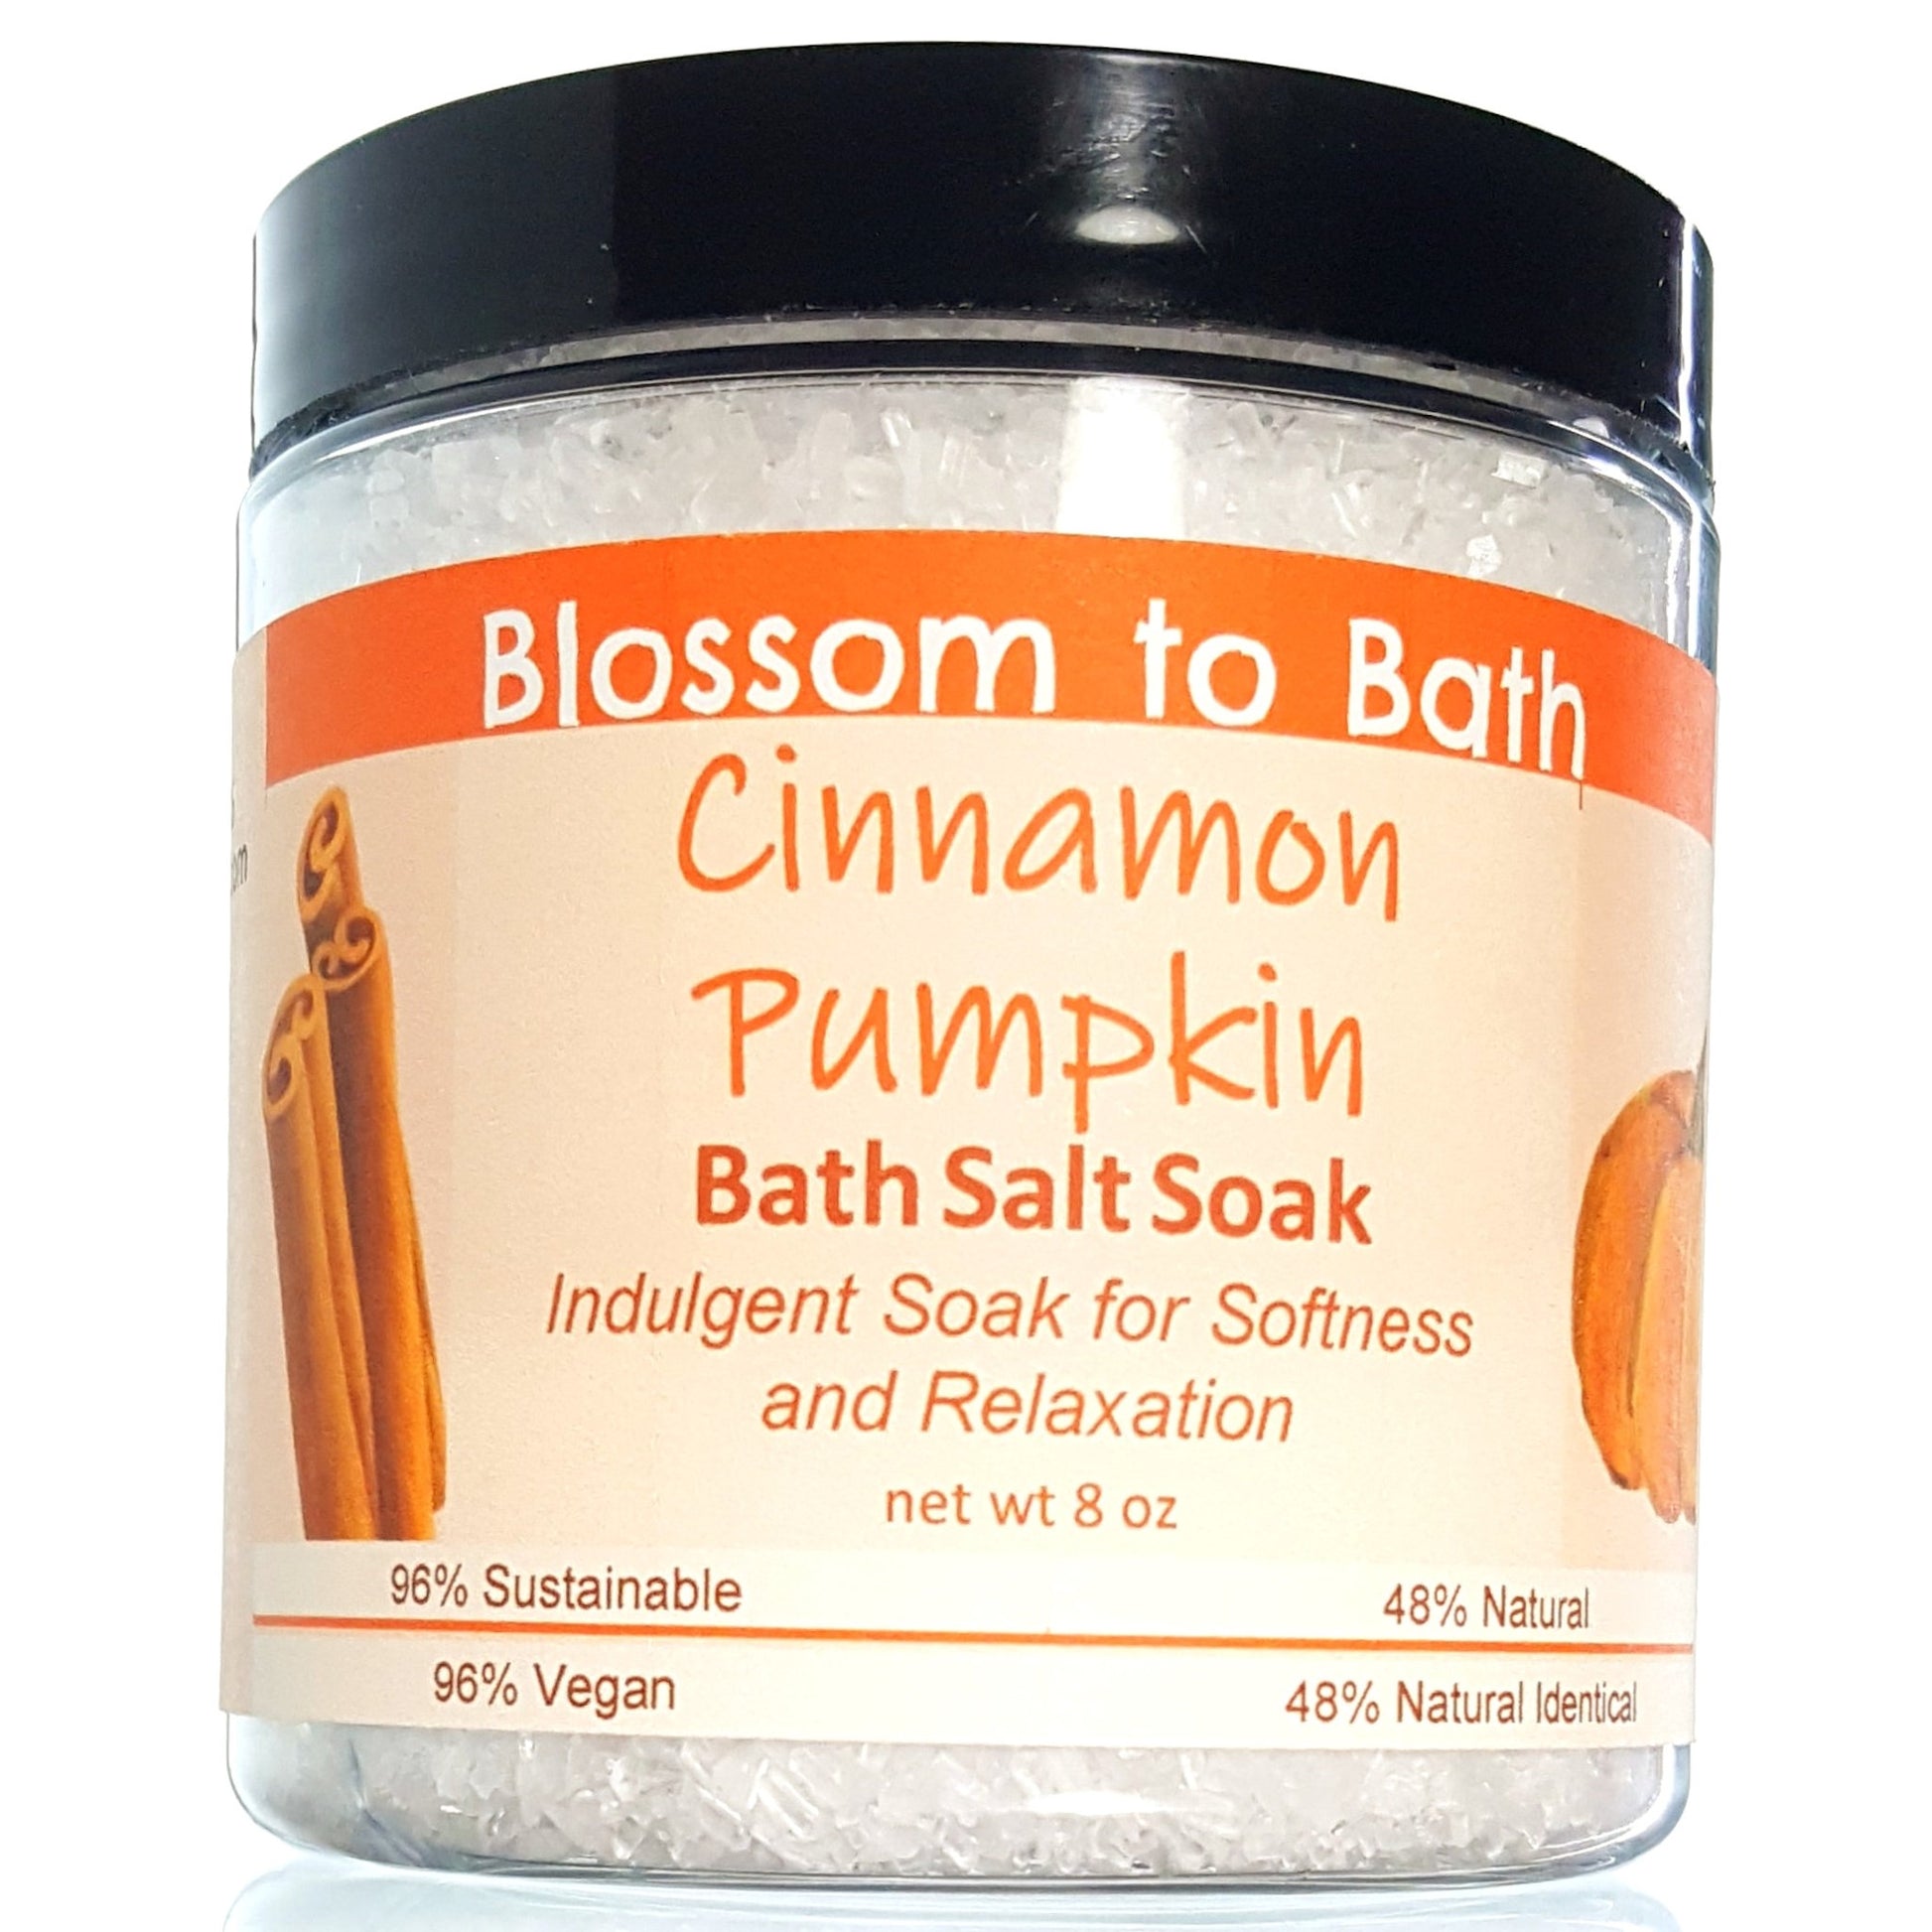 Buy Blossom to Bath Cinnamon Pumpkin Bath Salt Soak from Flowersong Soap Studio.  Scented epsom salts for a luxurious soaking experience  An engaging, cheerful scent filled with sweet vanilla and warm spice.